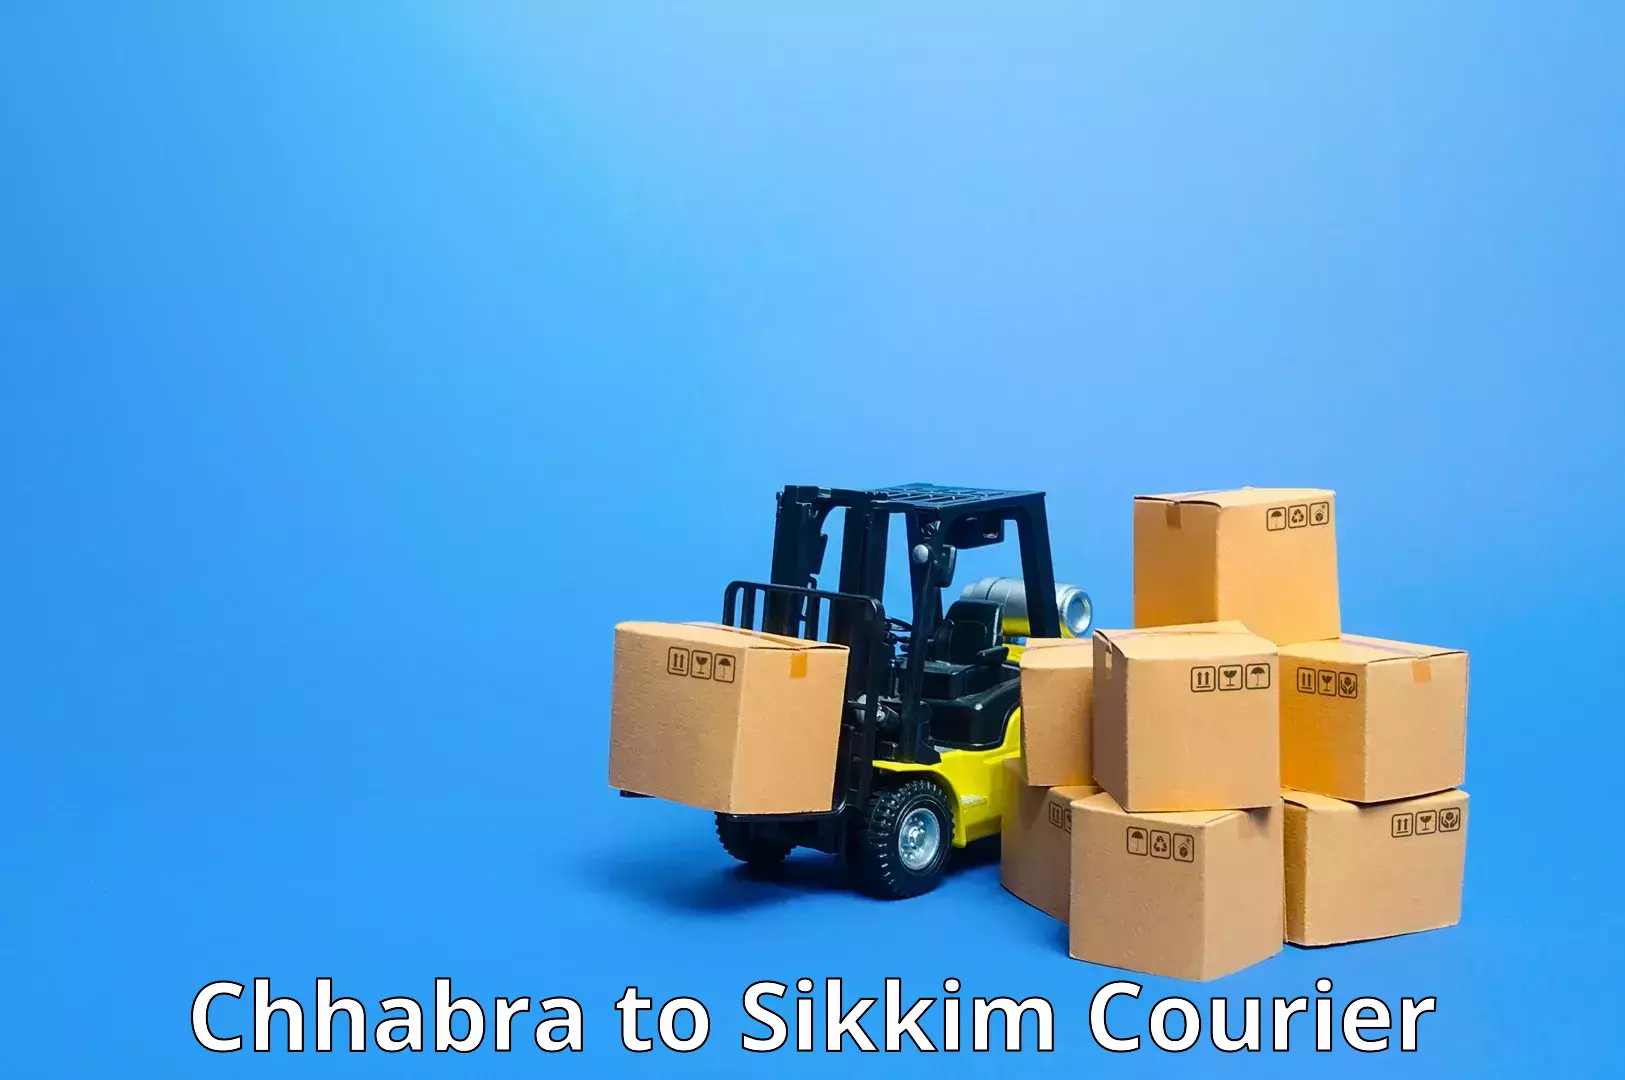 Shipping and handling Chhabra to Pelling